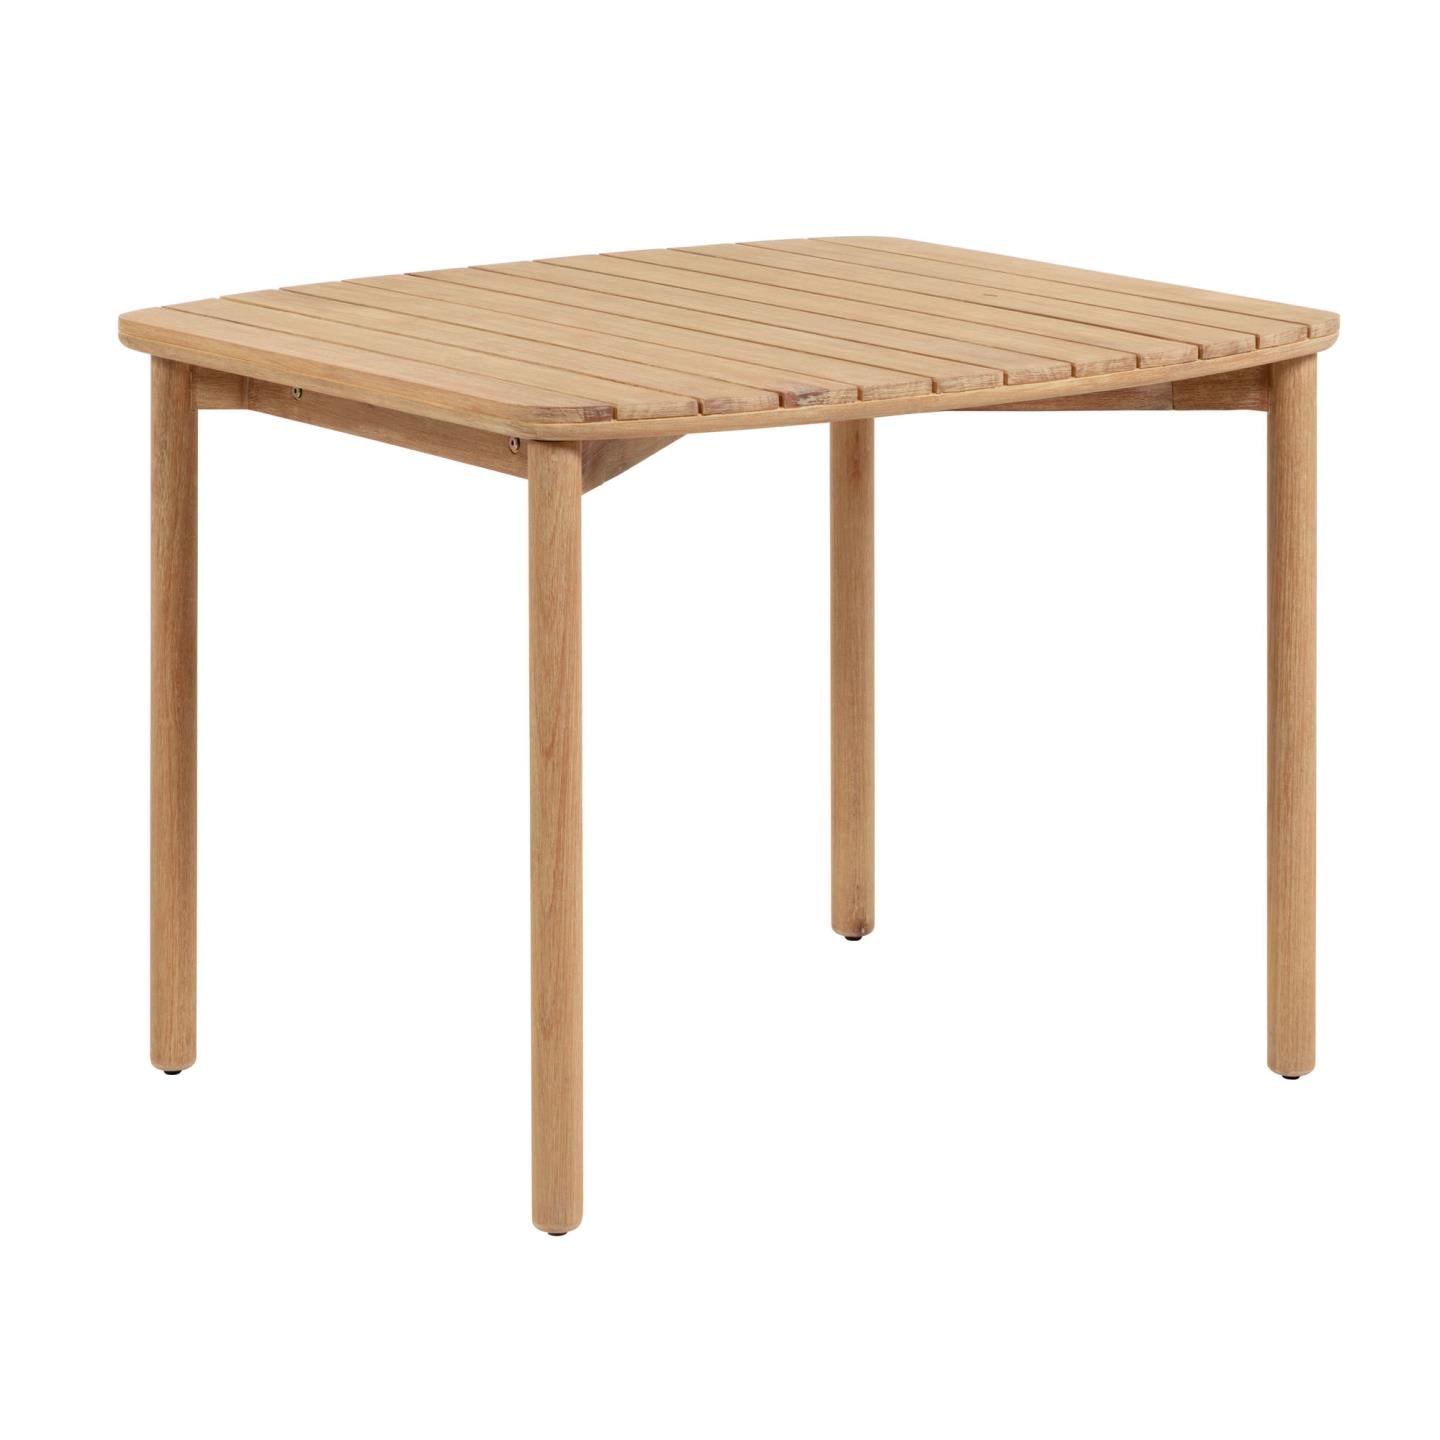 Sheryl 90 x 90 cm table made from solid eucalyptus FSC 100%